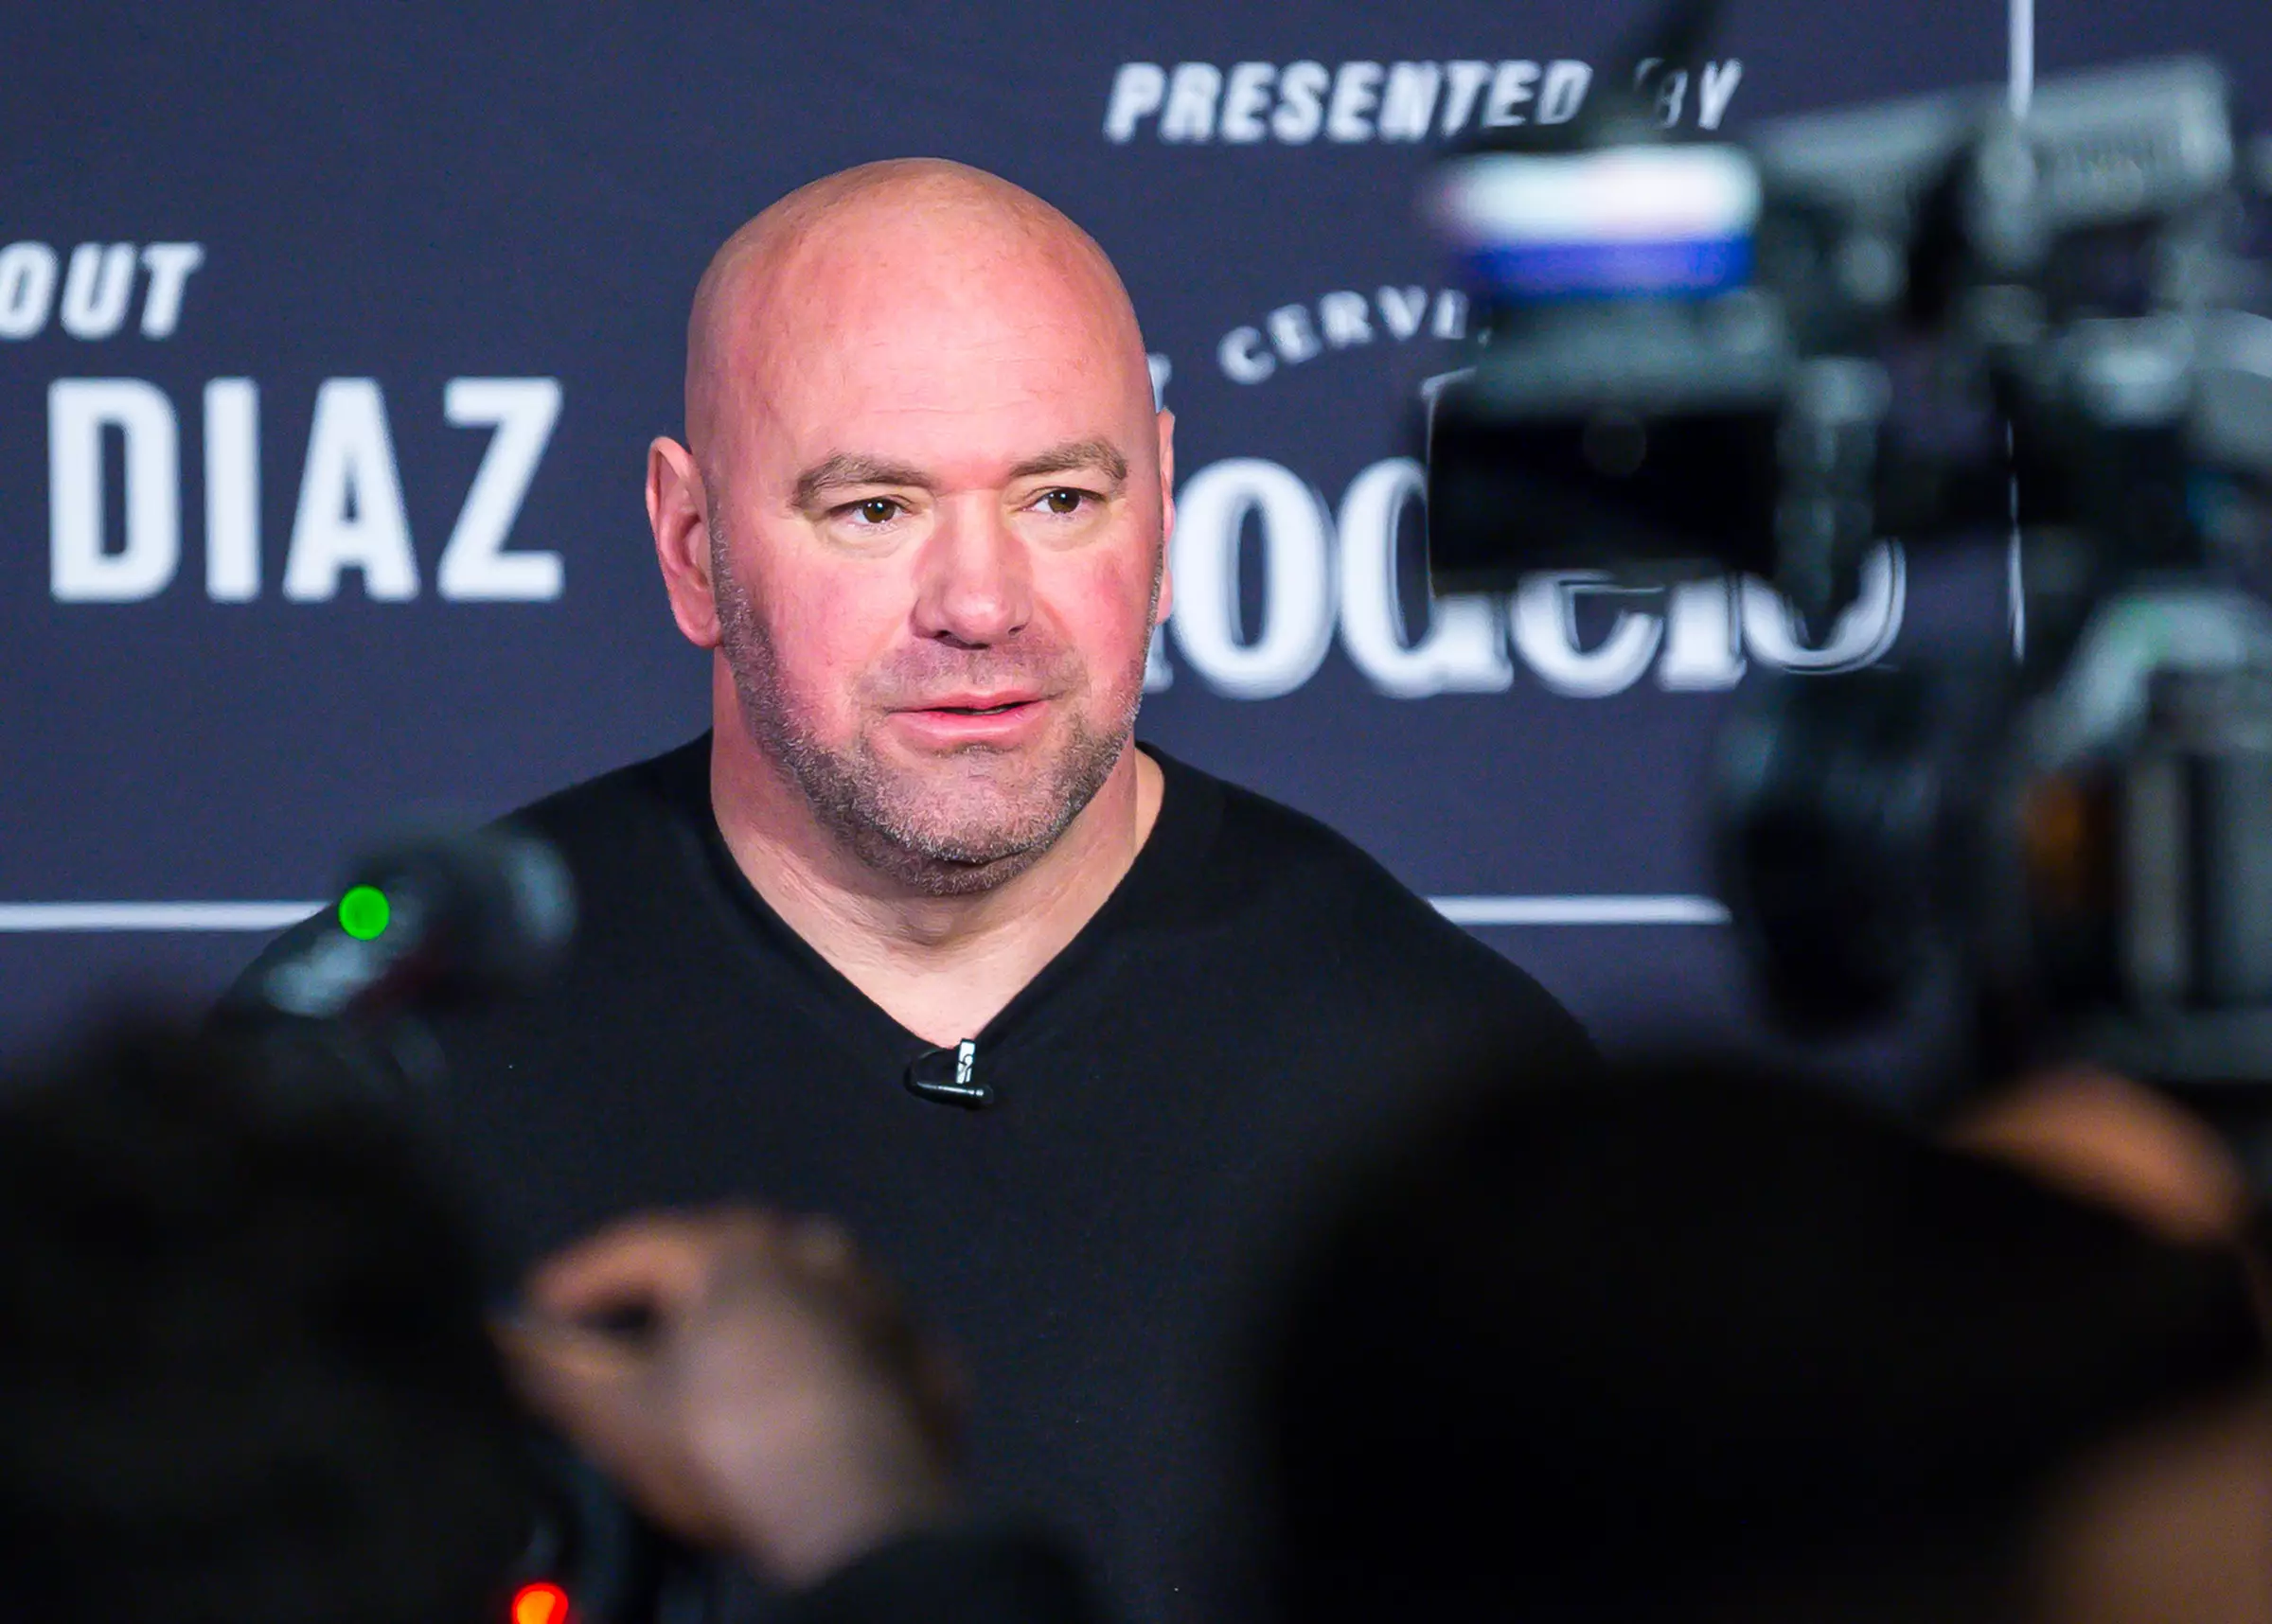 Dana White reckons the fight would be 'the biggest in the sport's history'.